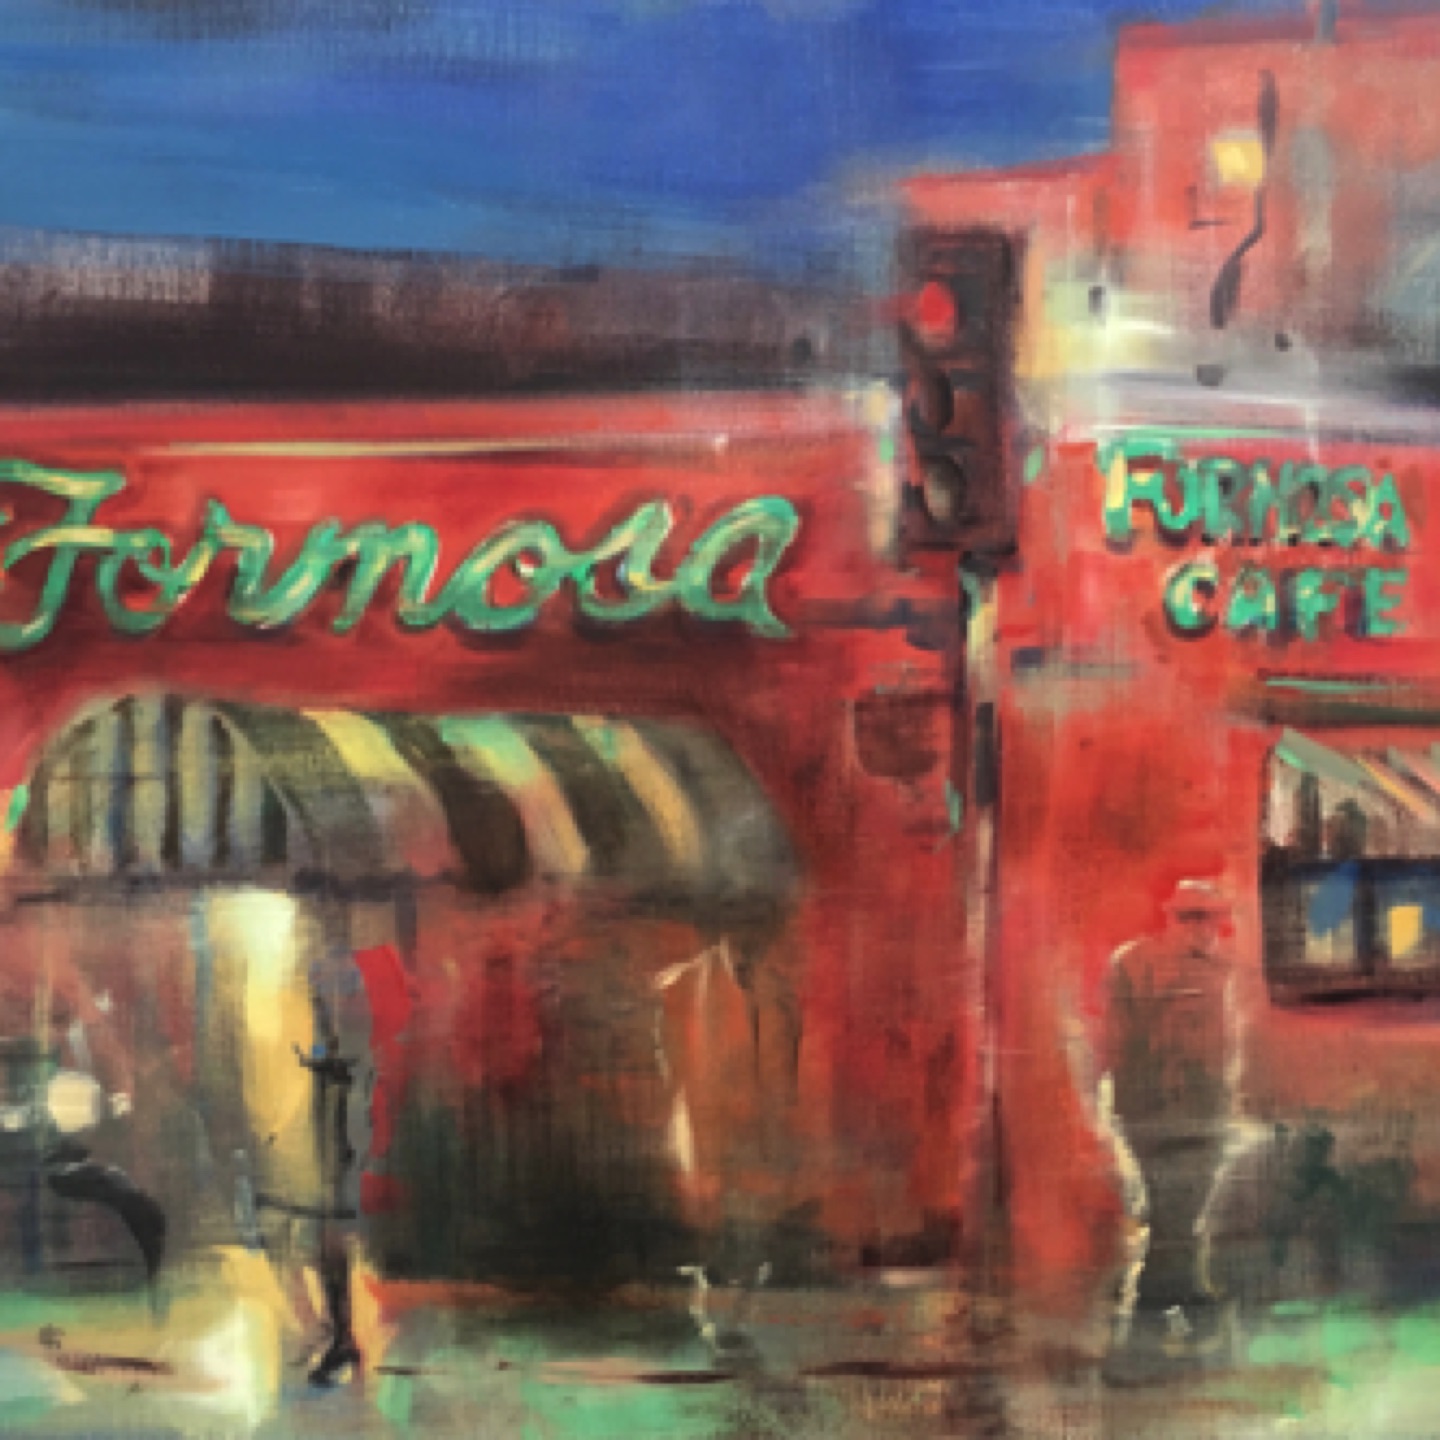 Gregg Chadwick
L.A. Noire (Formosa Cafe)
24"x36"oil on linen 2019
Private Collection, Hollywood, California 
Sold by Castelli Art - January 2020